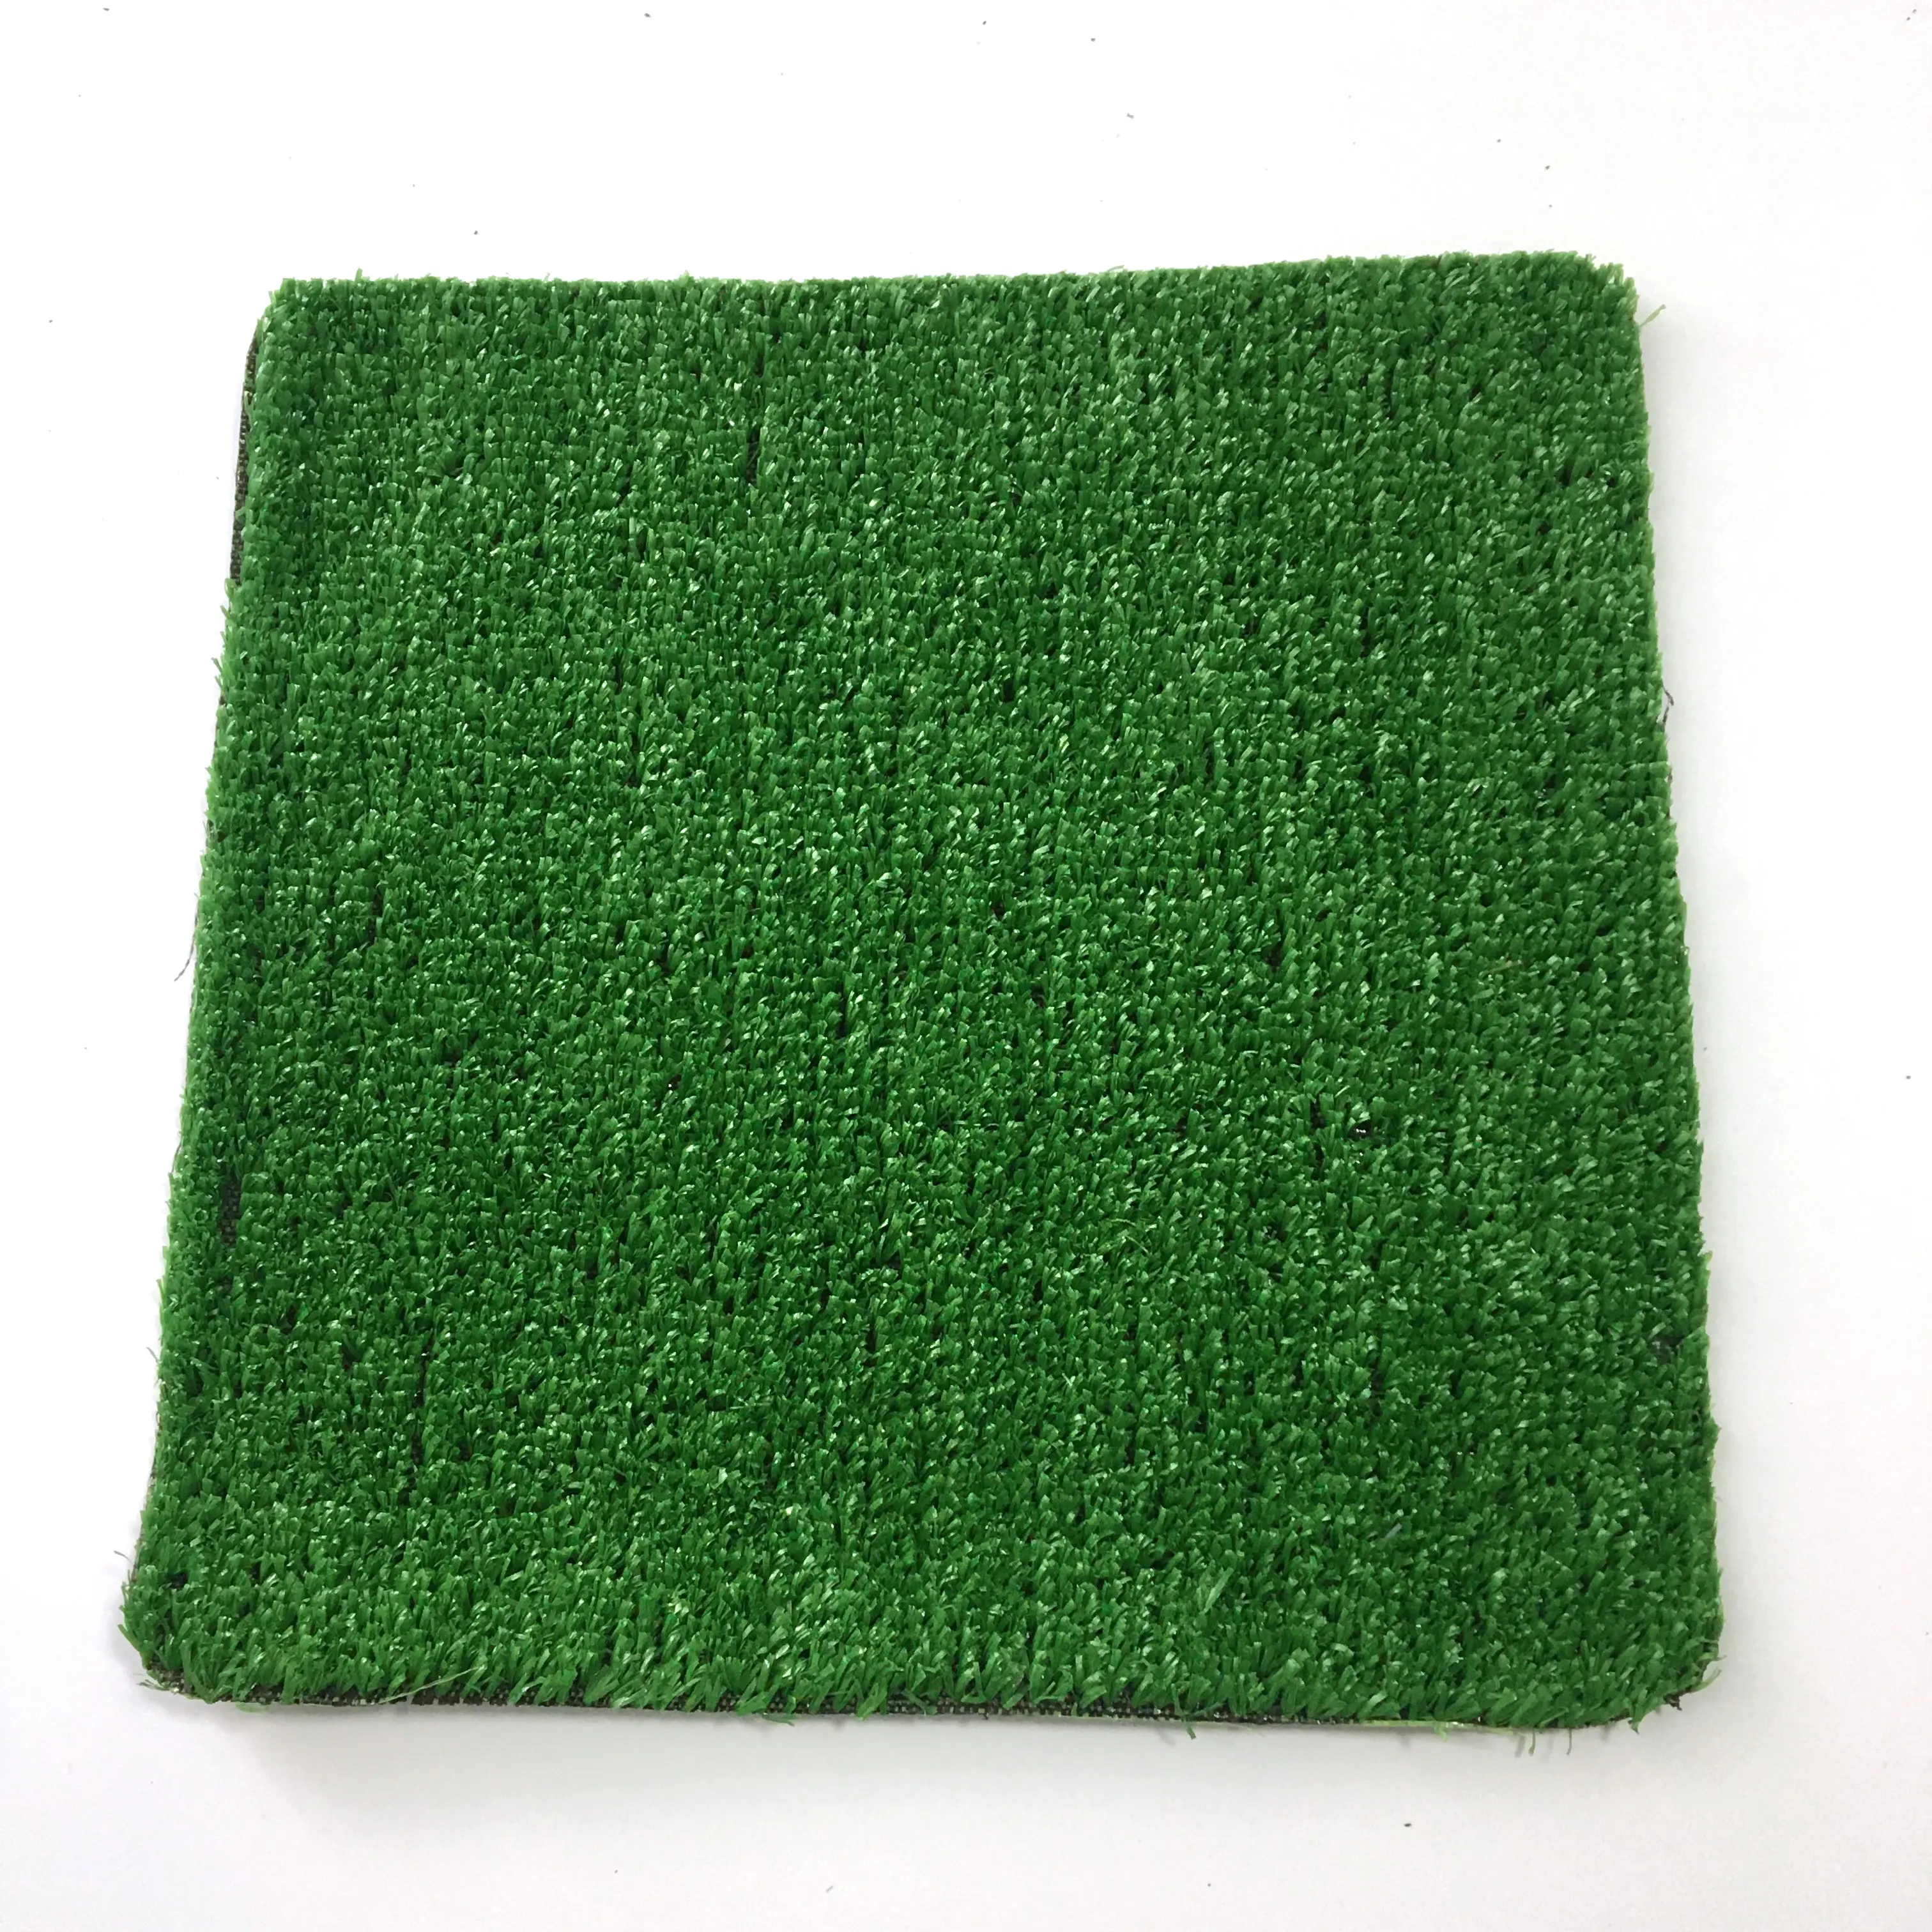 Landscape artificial grass synthetic grass turf for landscaping and garden flooring